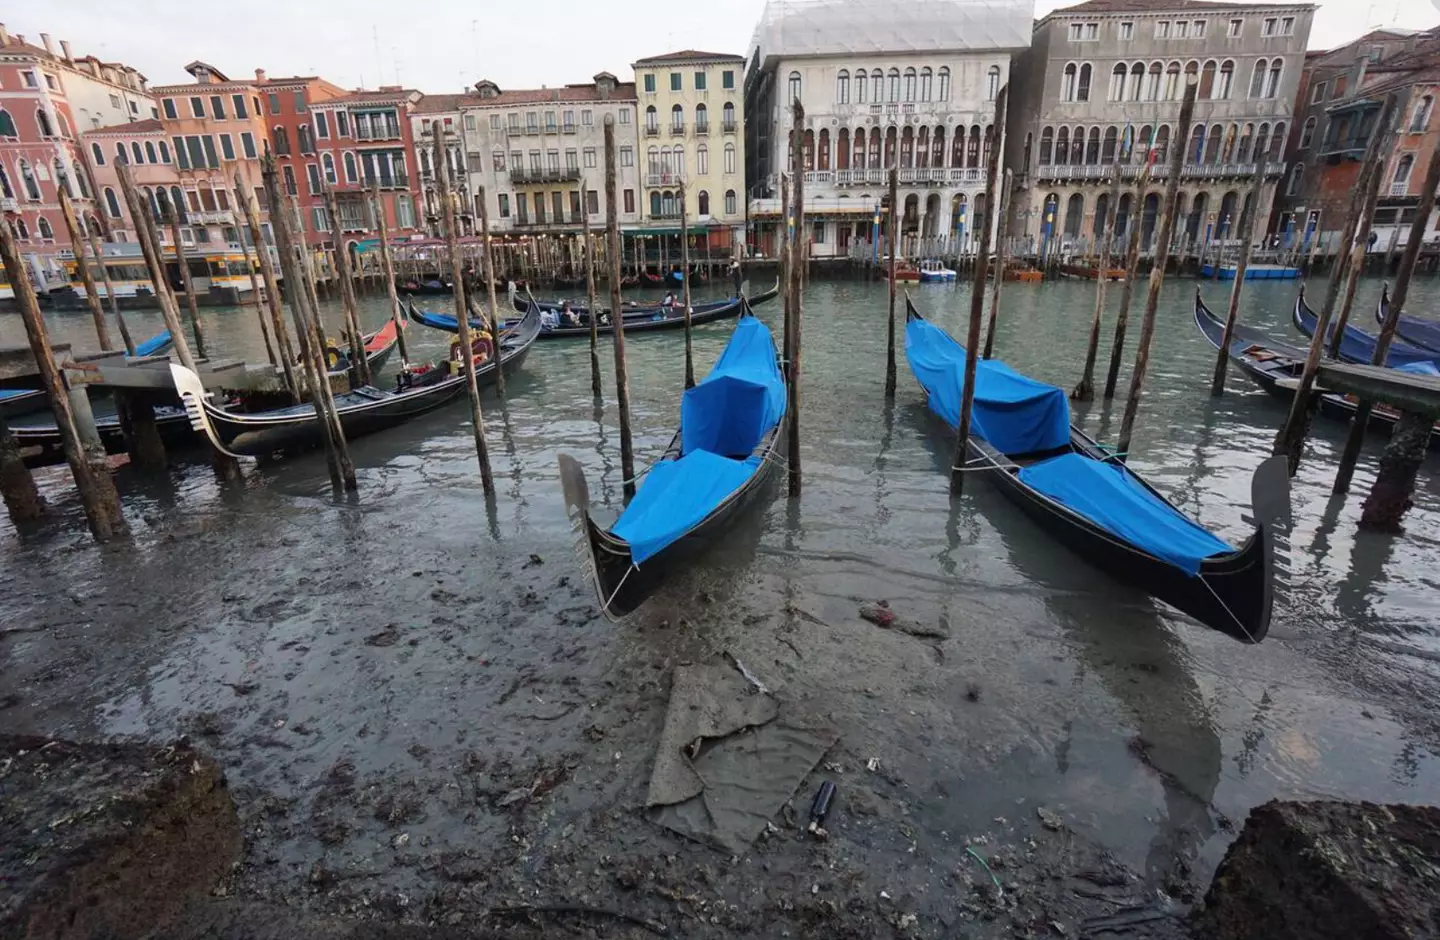 Gondolas lie on the bottom of the Grand Canal during an unusually low tide in Venice, February 2023.